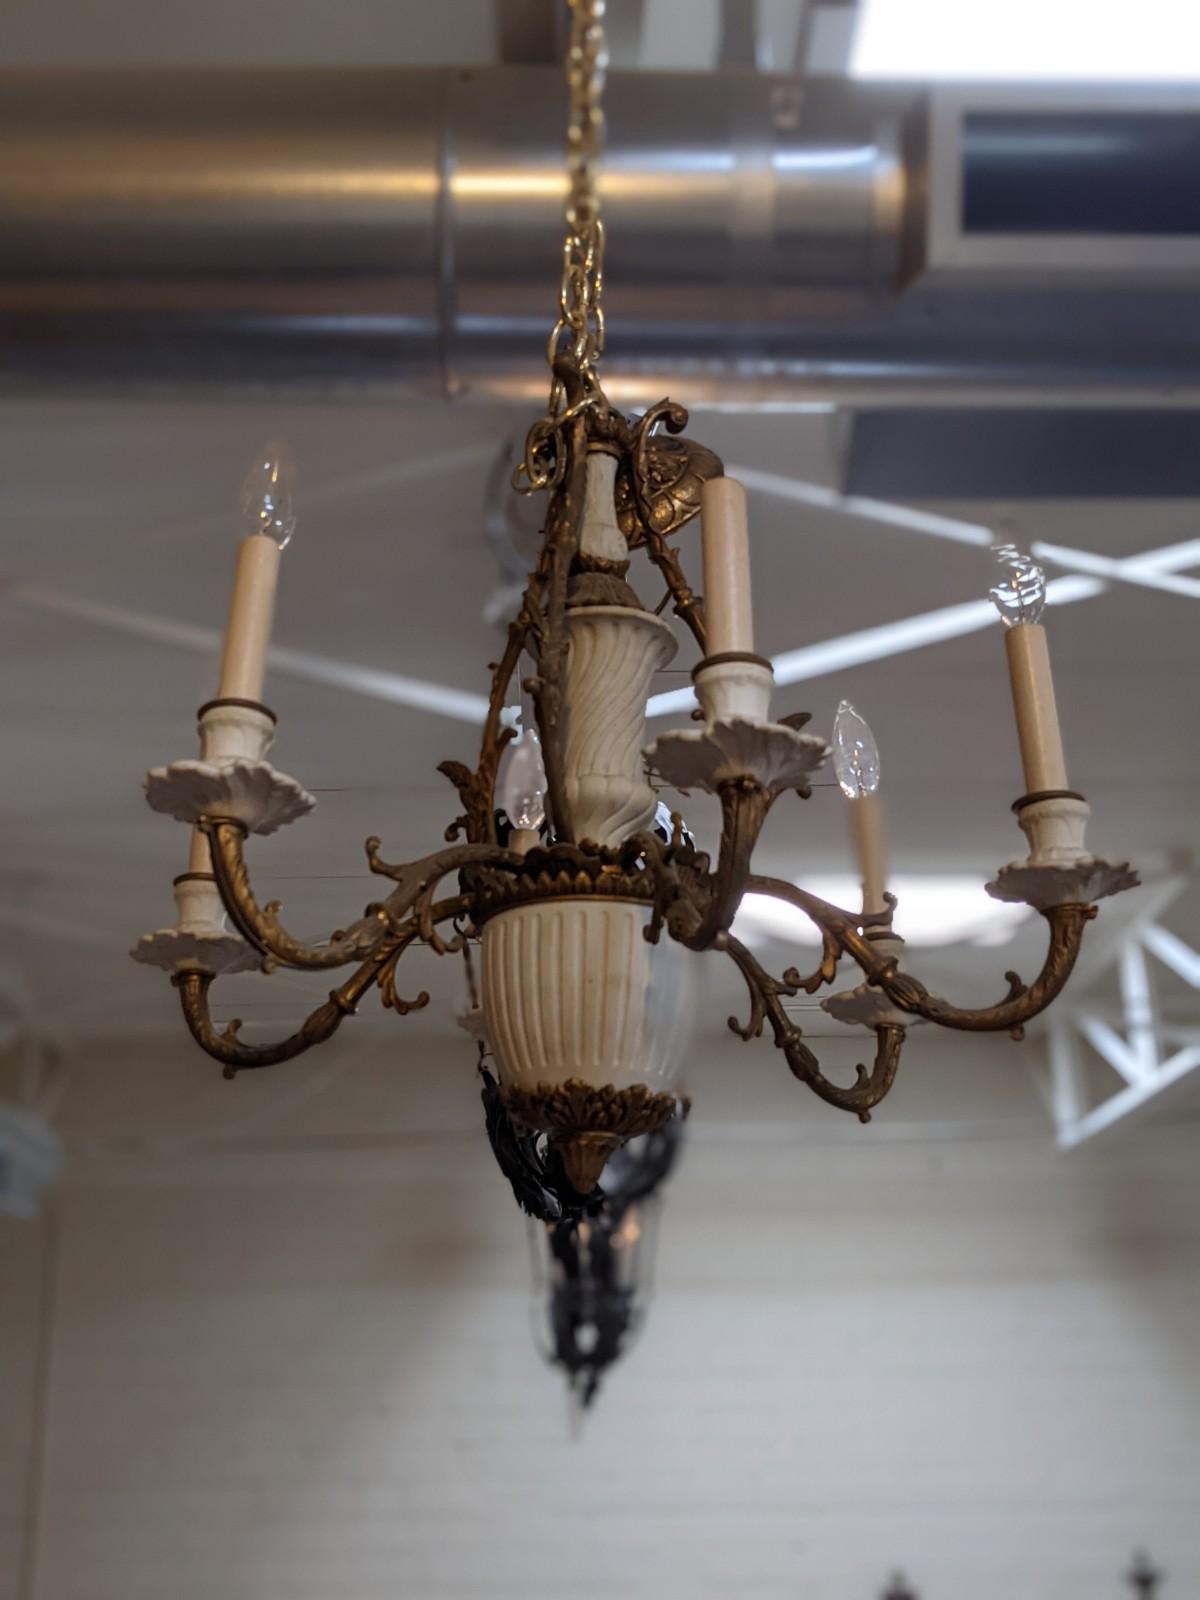 This bronze and ceramic chandelier origins from England, circa 1900.